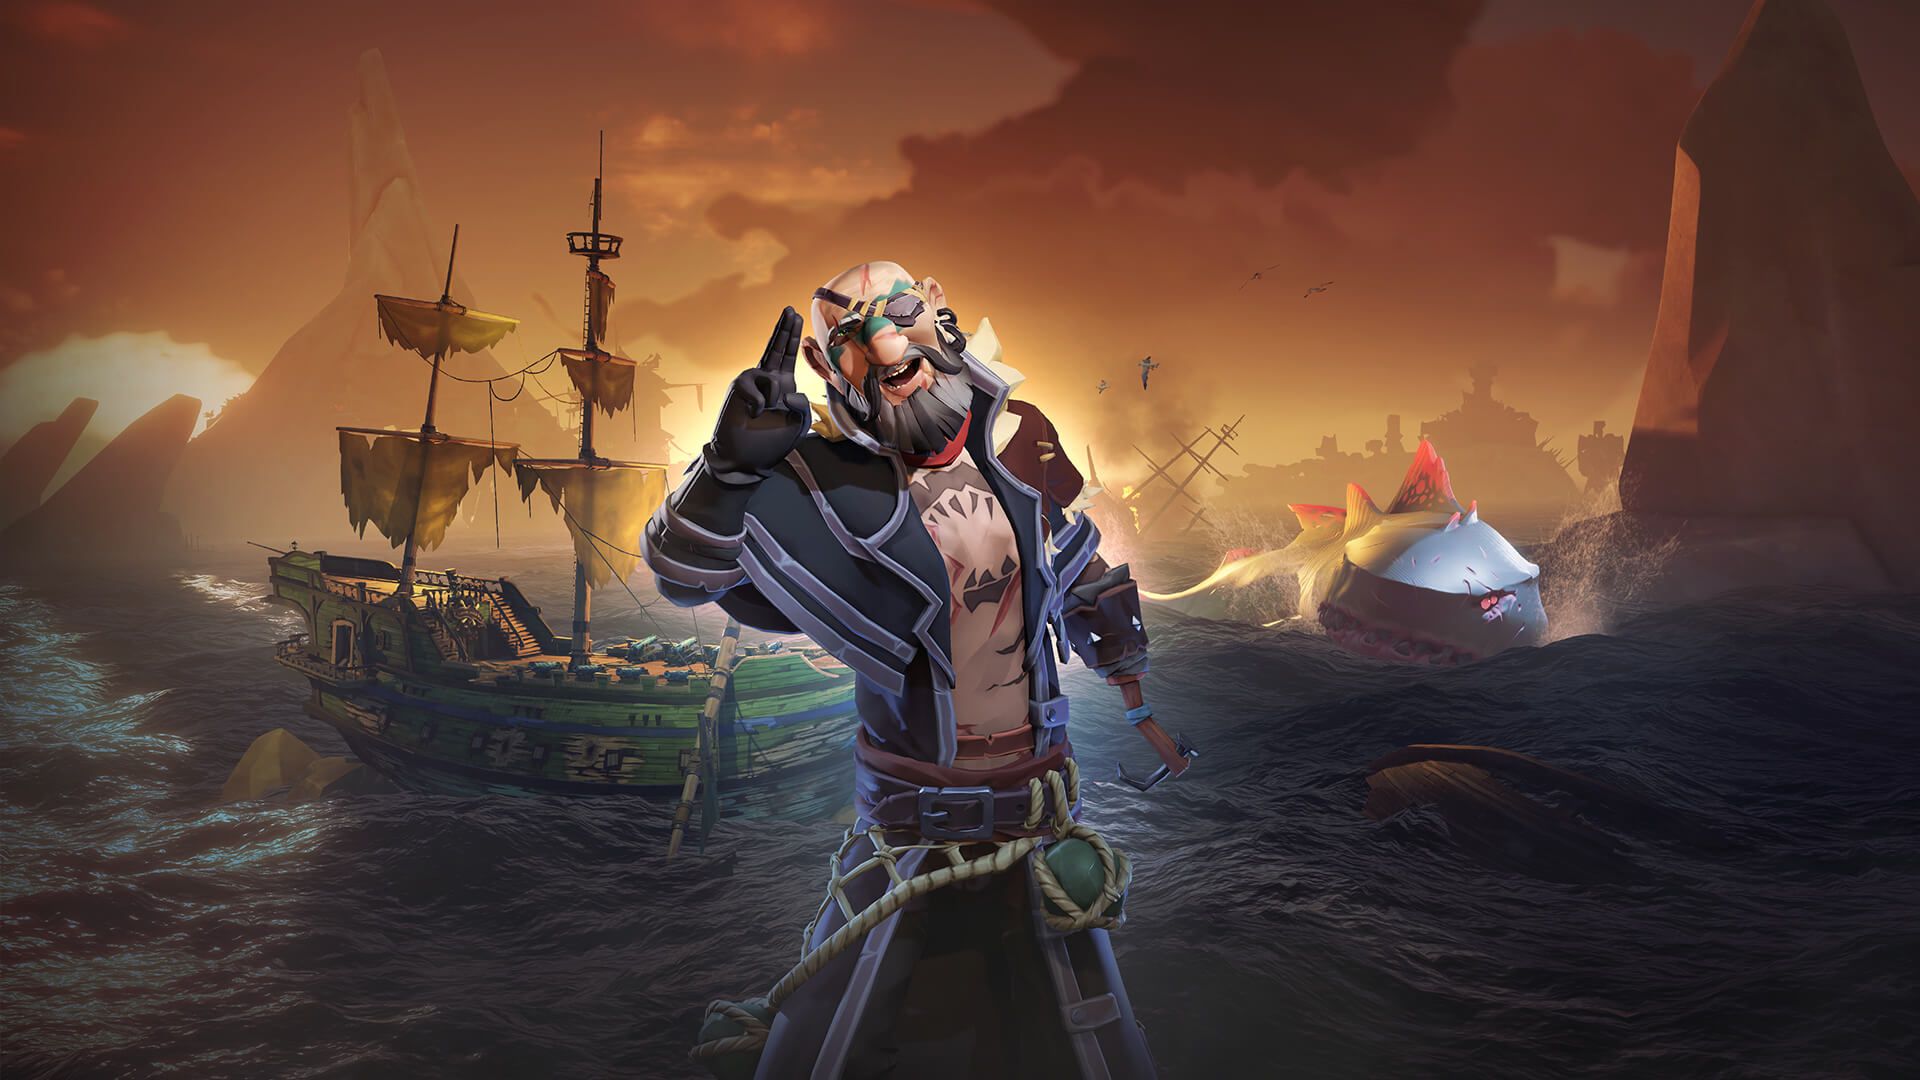 Video For More Adventures Await Sailors Both New and Legendary in Sea of Thieves